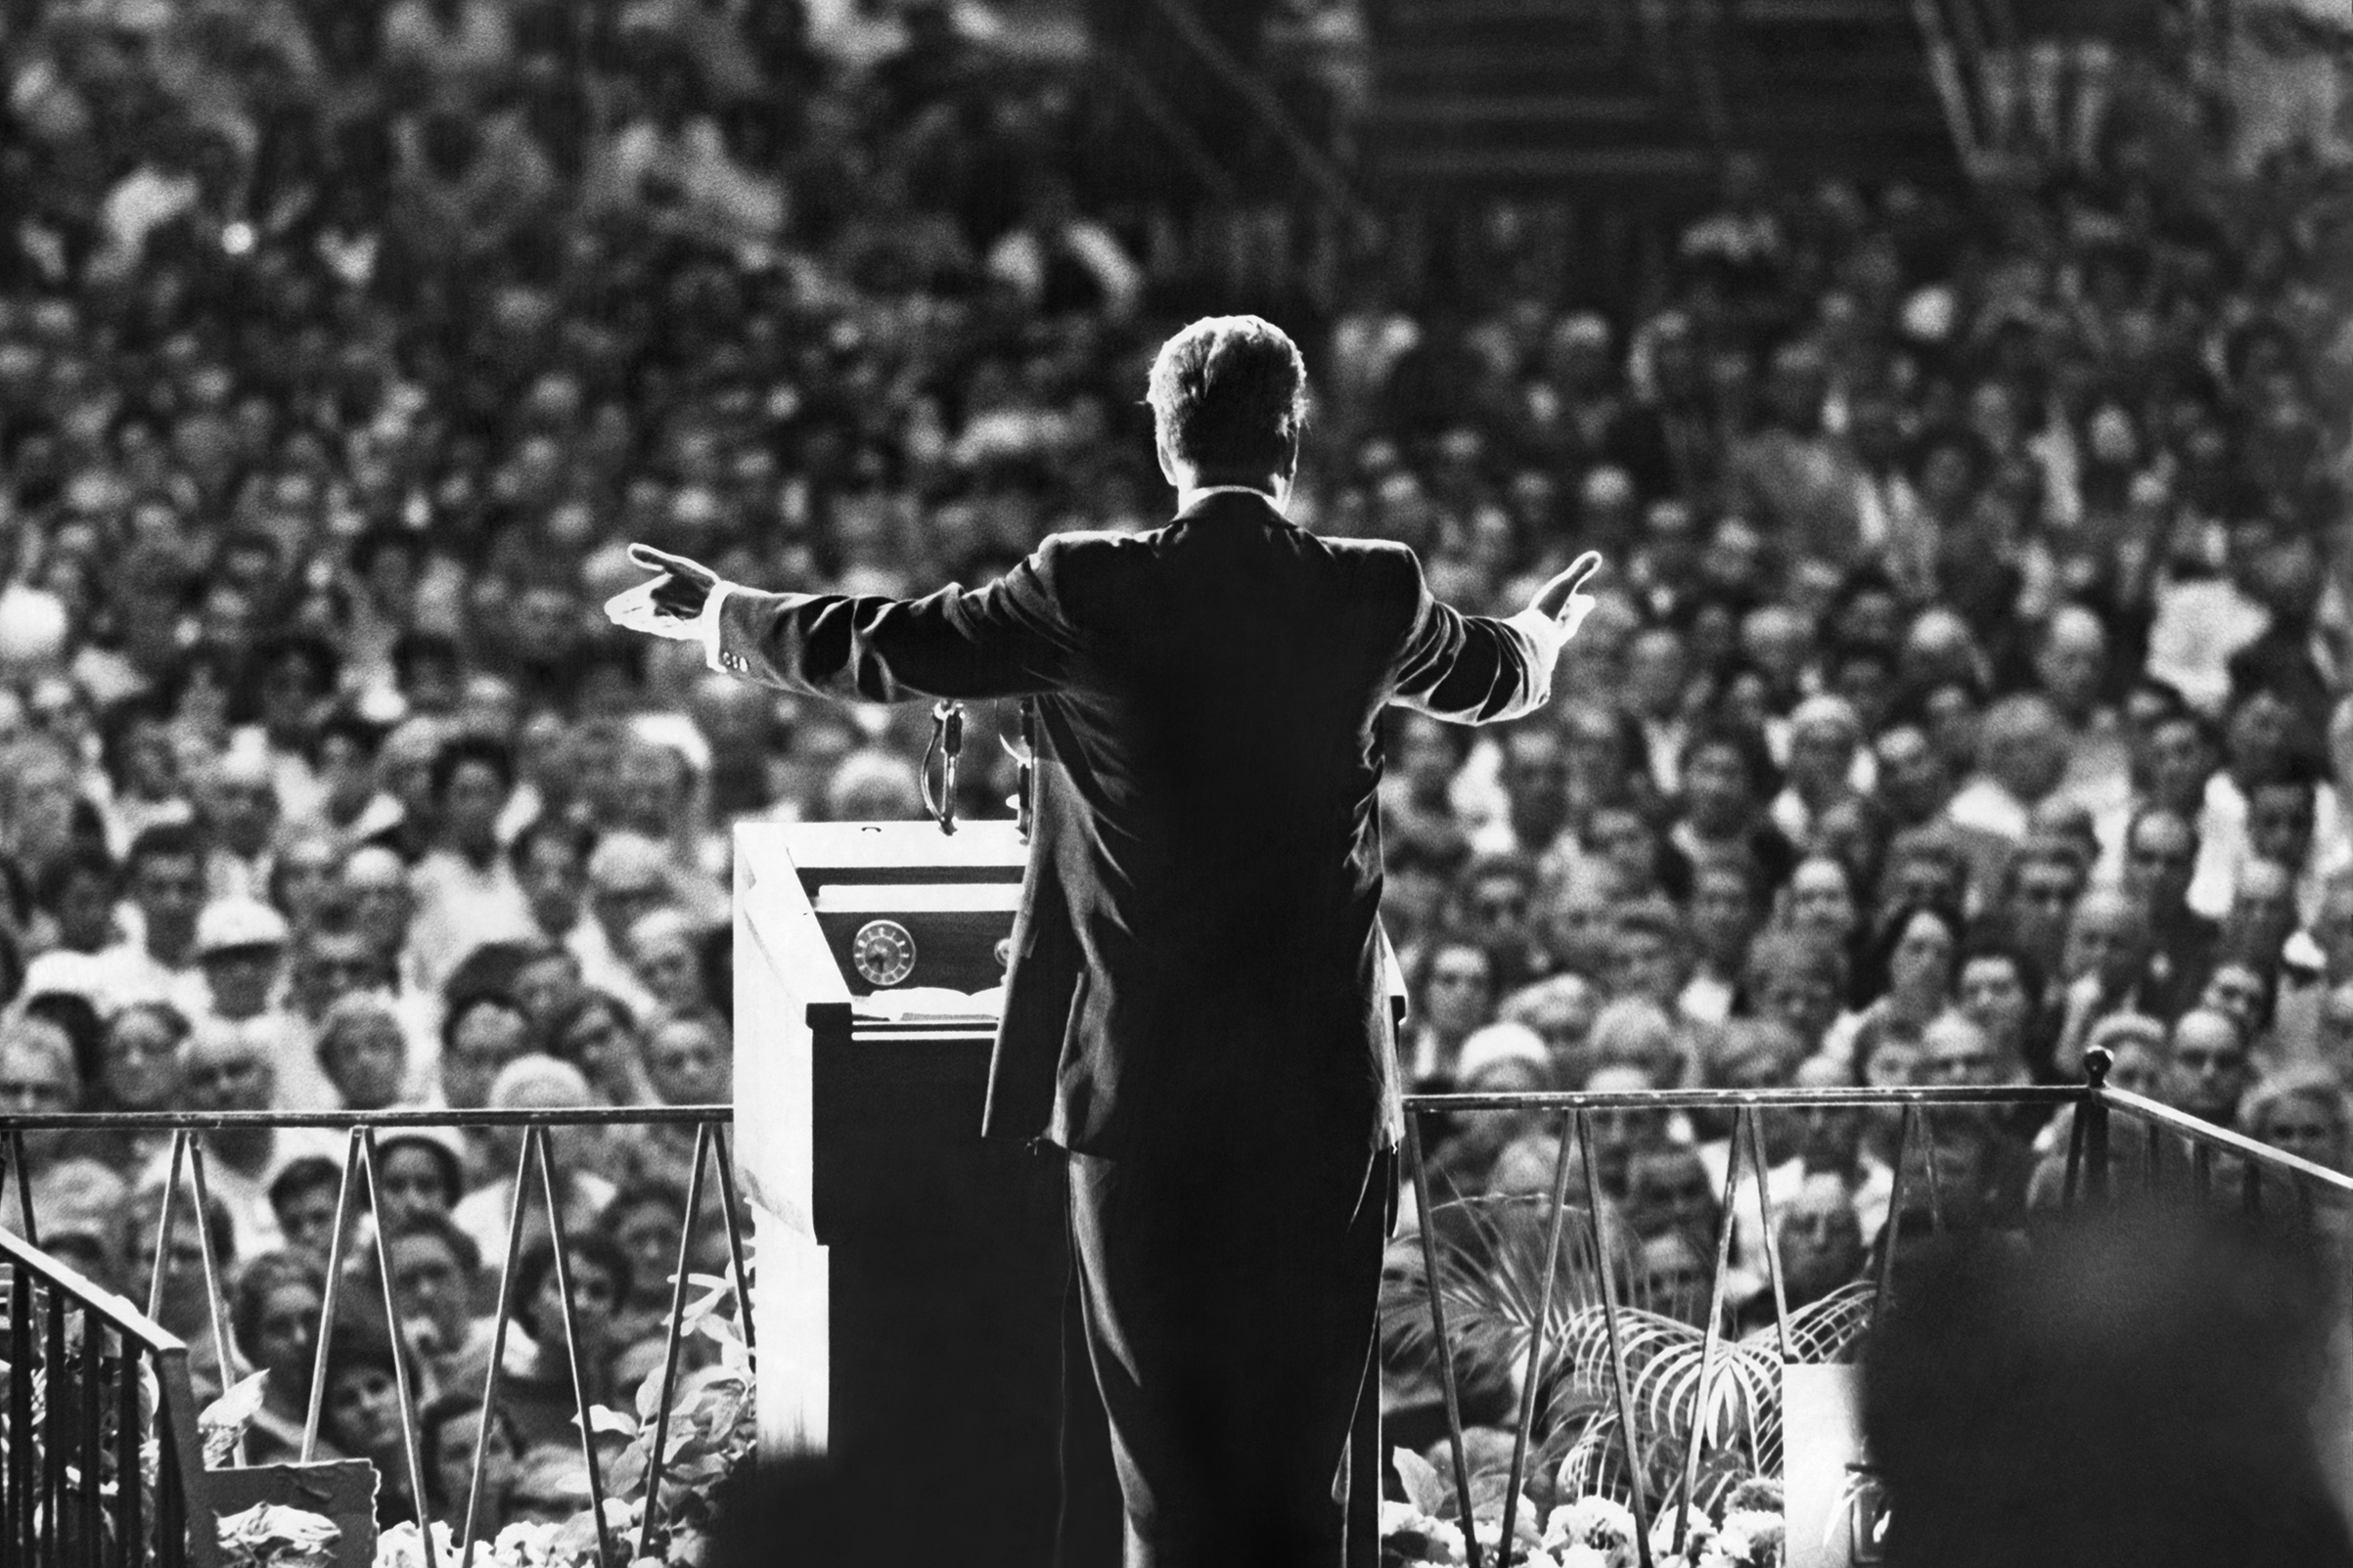 Christian evangelist Billy Graham preaching at the Miami Beach Convention Hall on March 6, 1961 in Miami Beach, Florida, USA.